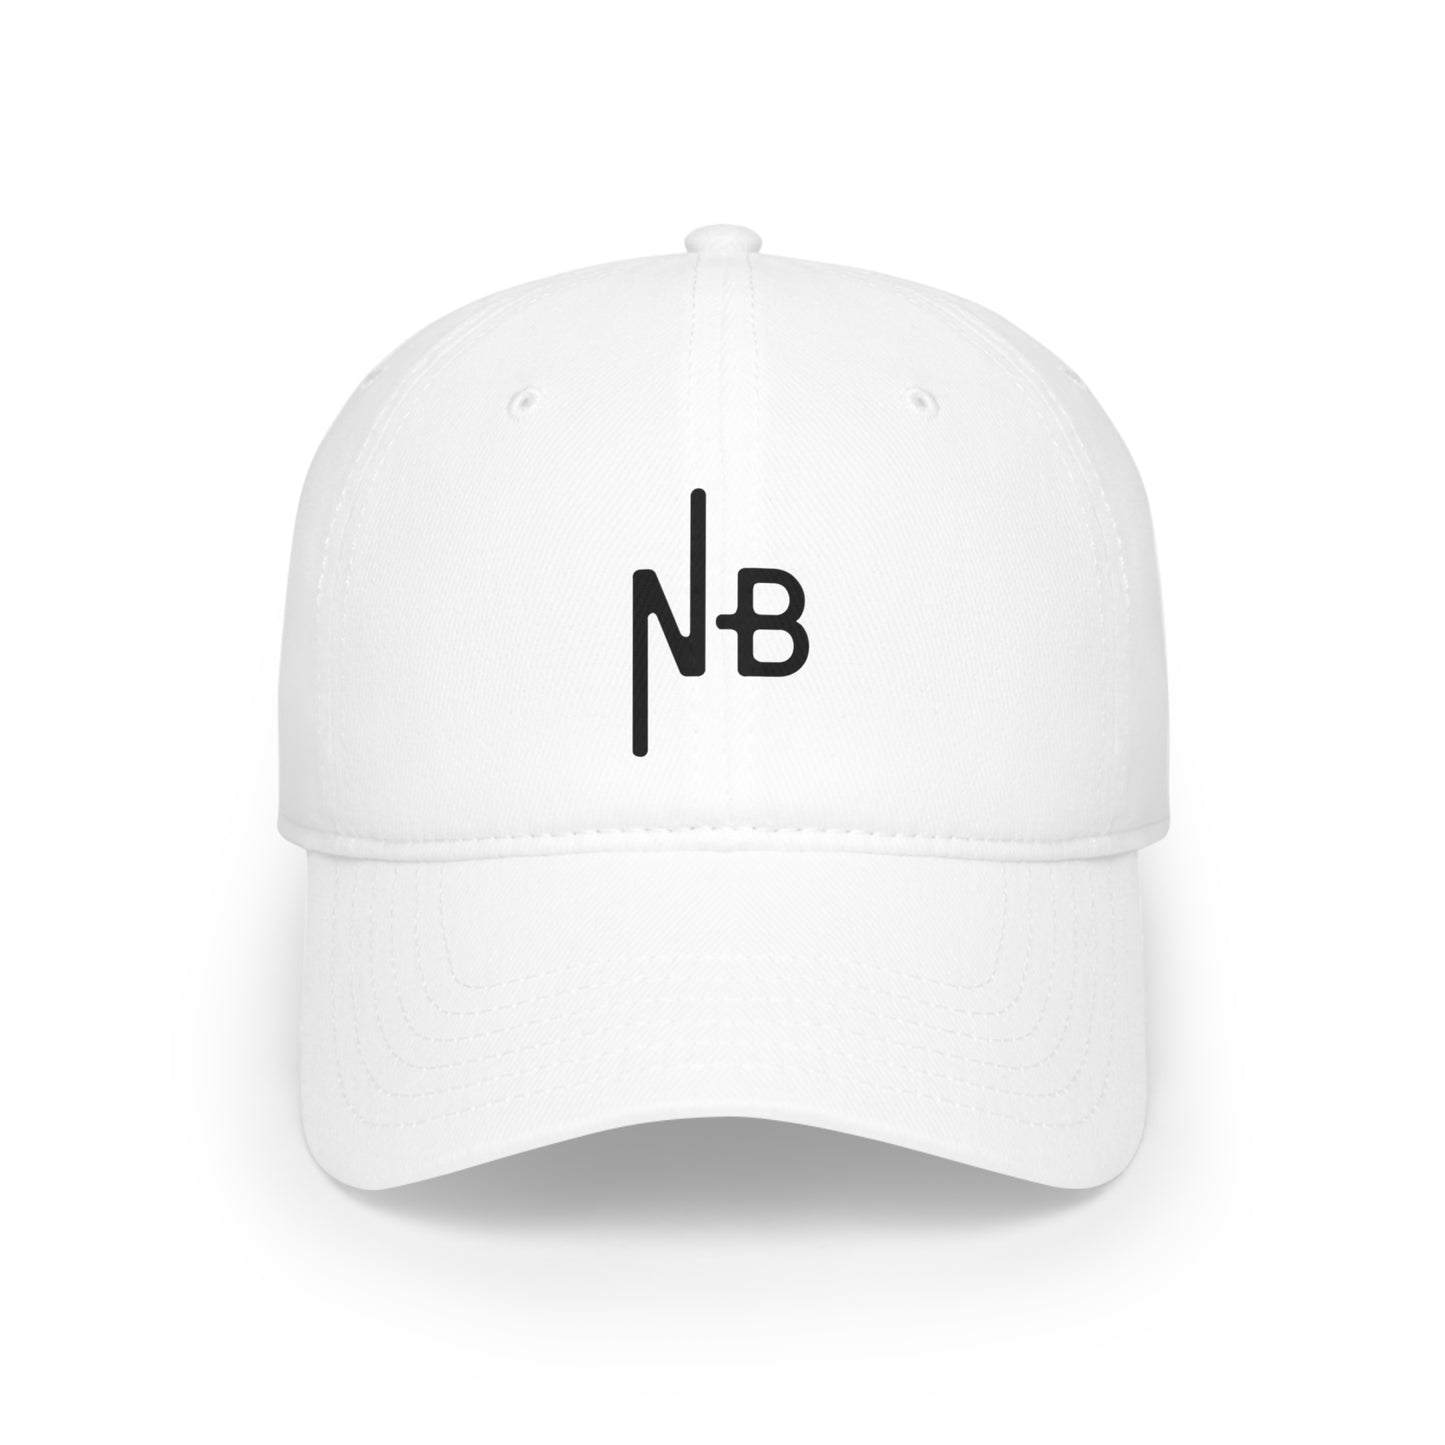 Got you Covered with our Northern Beaches logo Hats